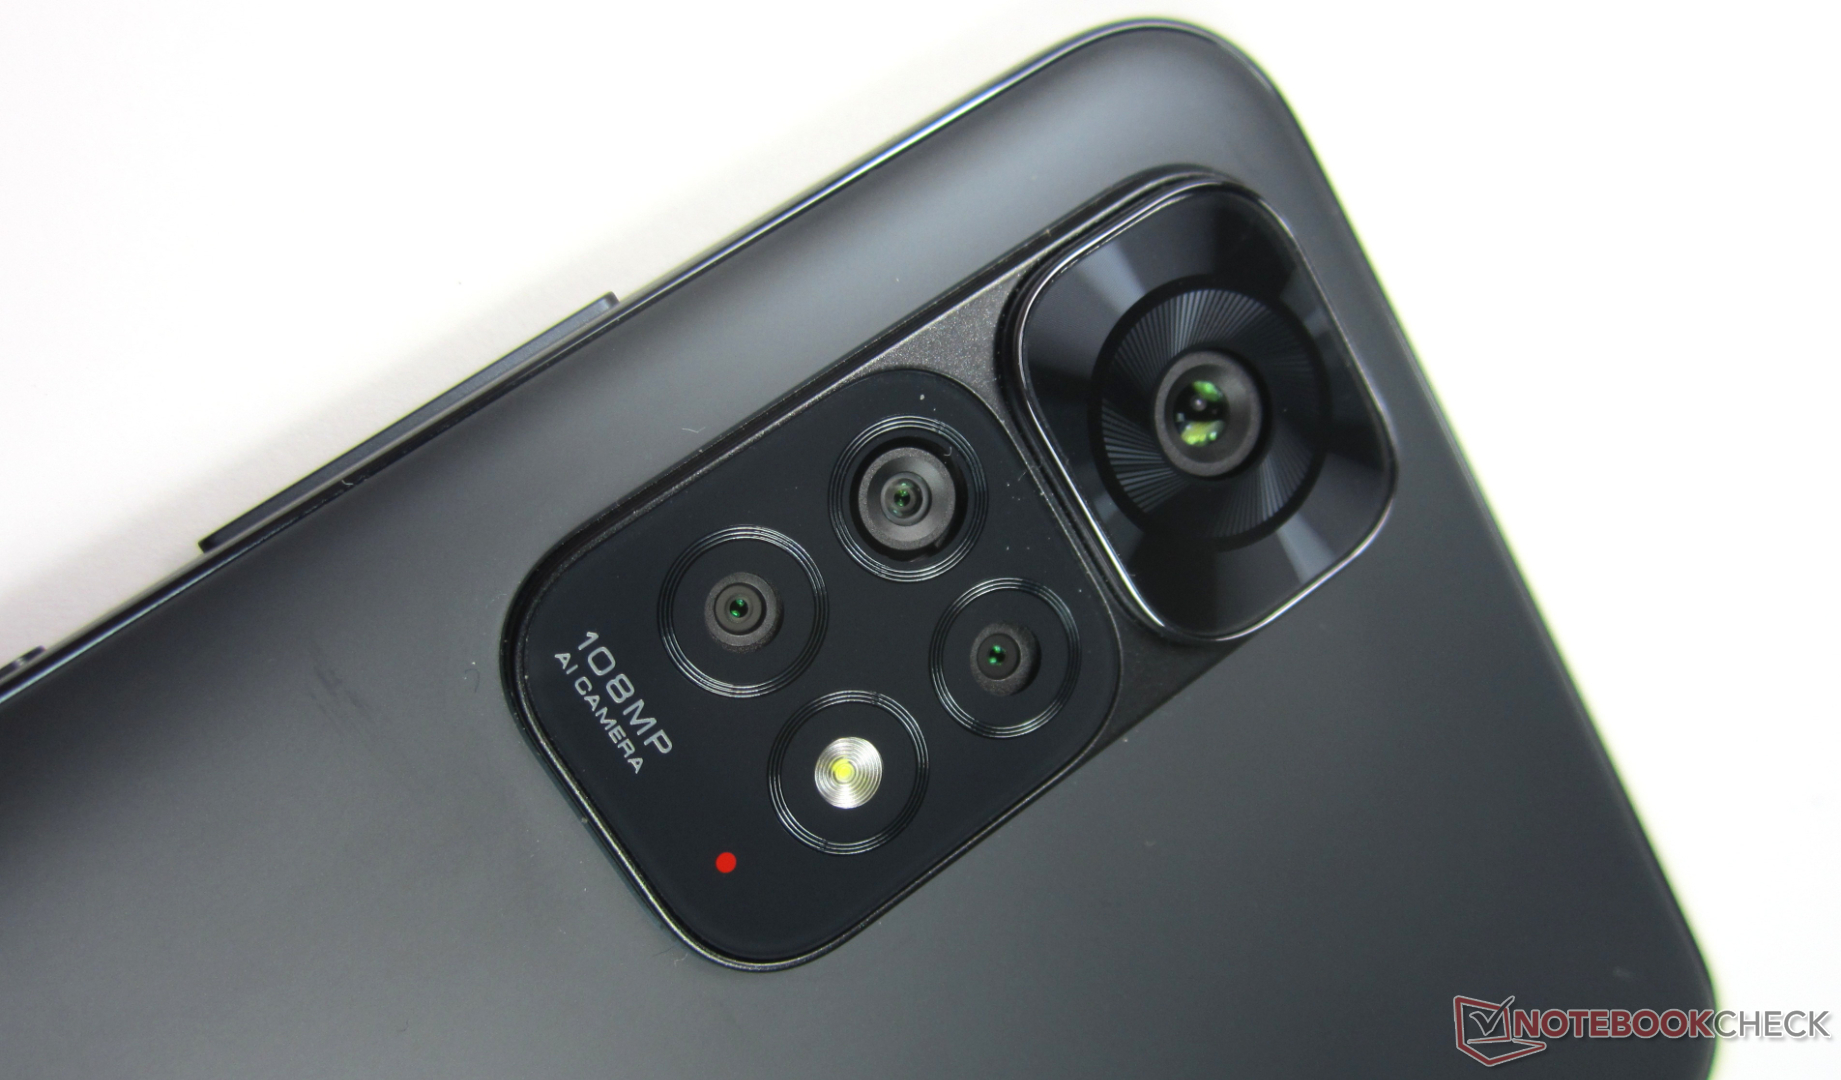 Nubia Z50 Ultra previewed with 35 mm, 85 mm and new invisible selfie  cameras -  News